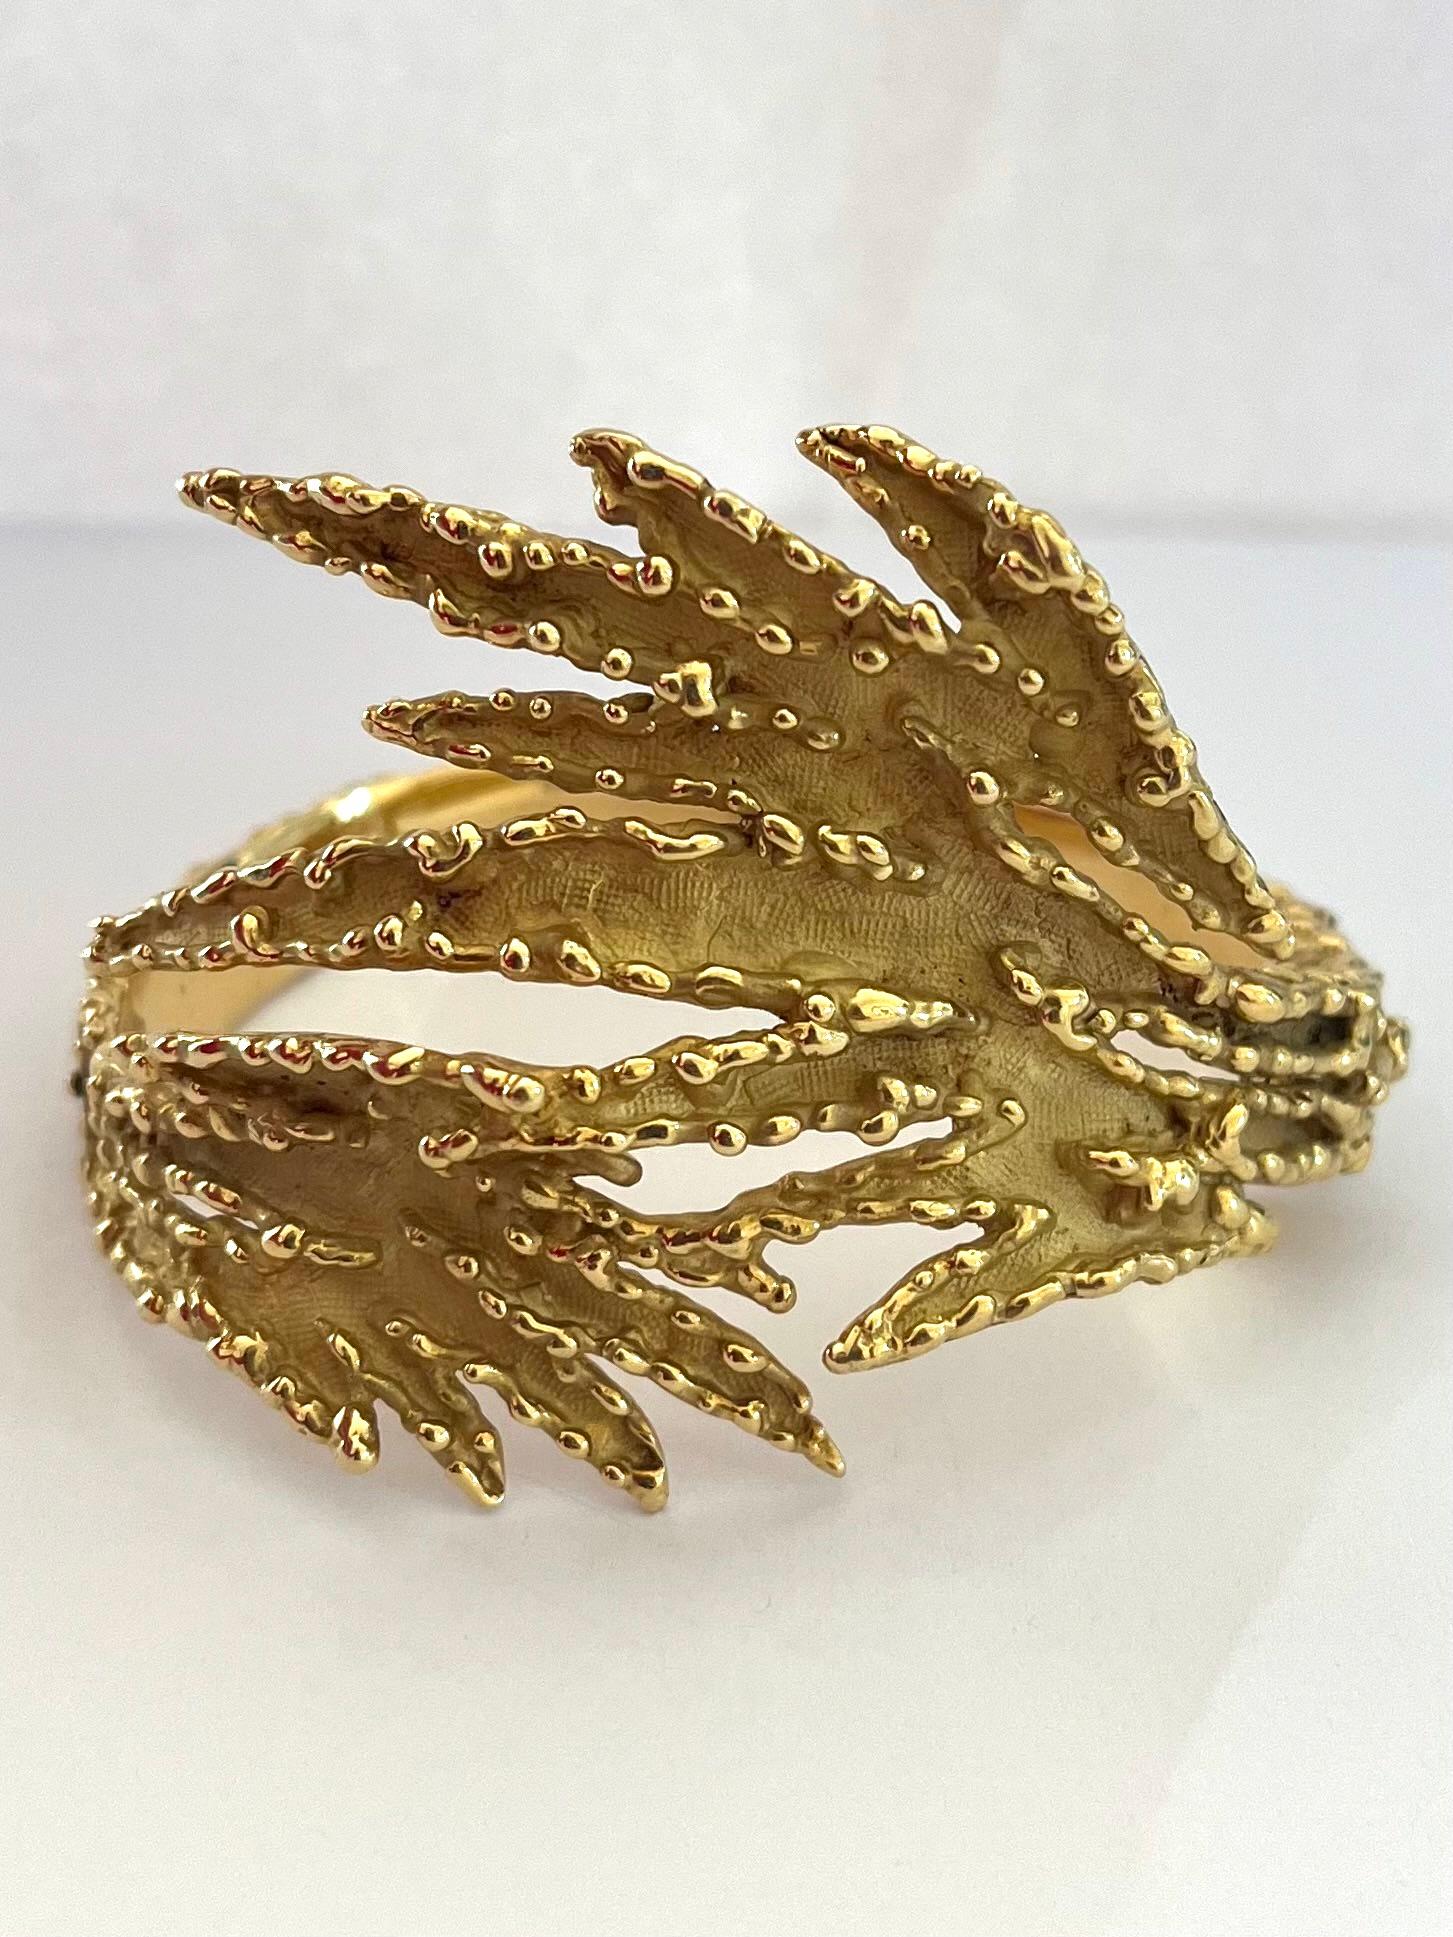 Striking Sculptural bracelet in textured gold. The technique used is fan ancient one called filigree. The design is both organic and sculptural which represents the Modernist movement in Jewelry. Made in the 70s. Signed Mauboussin Paris.